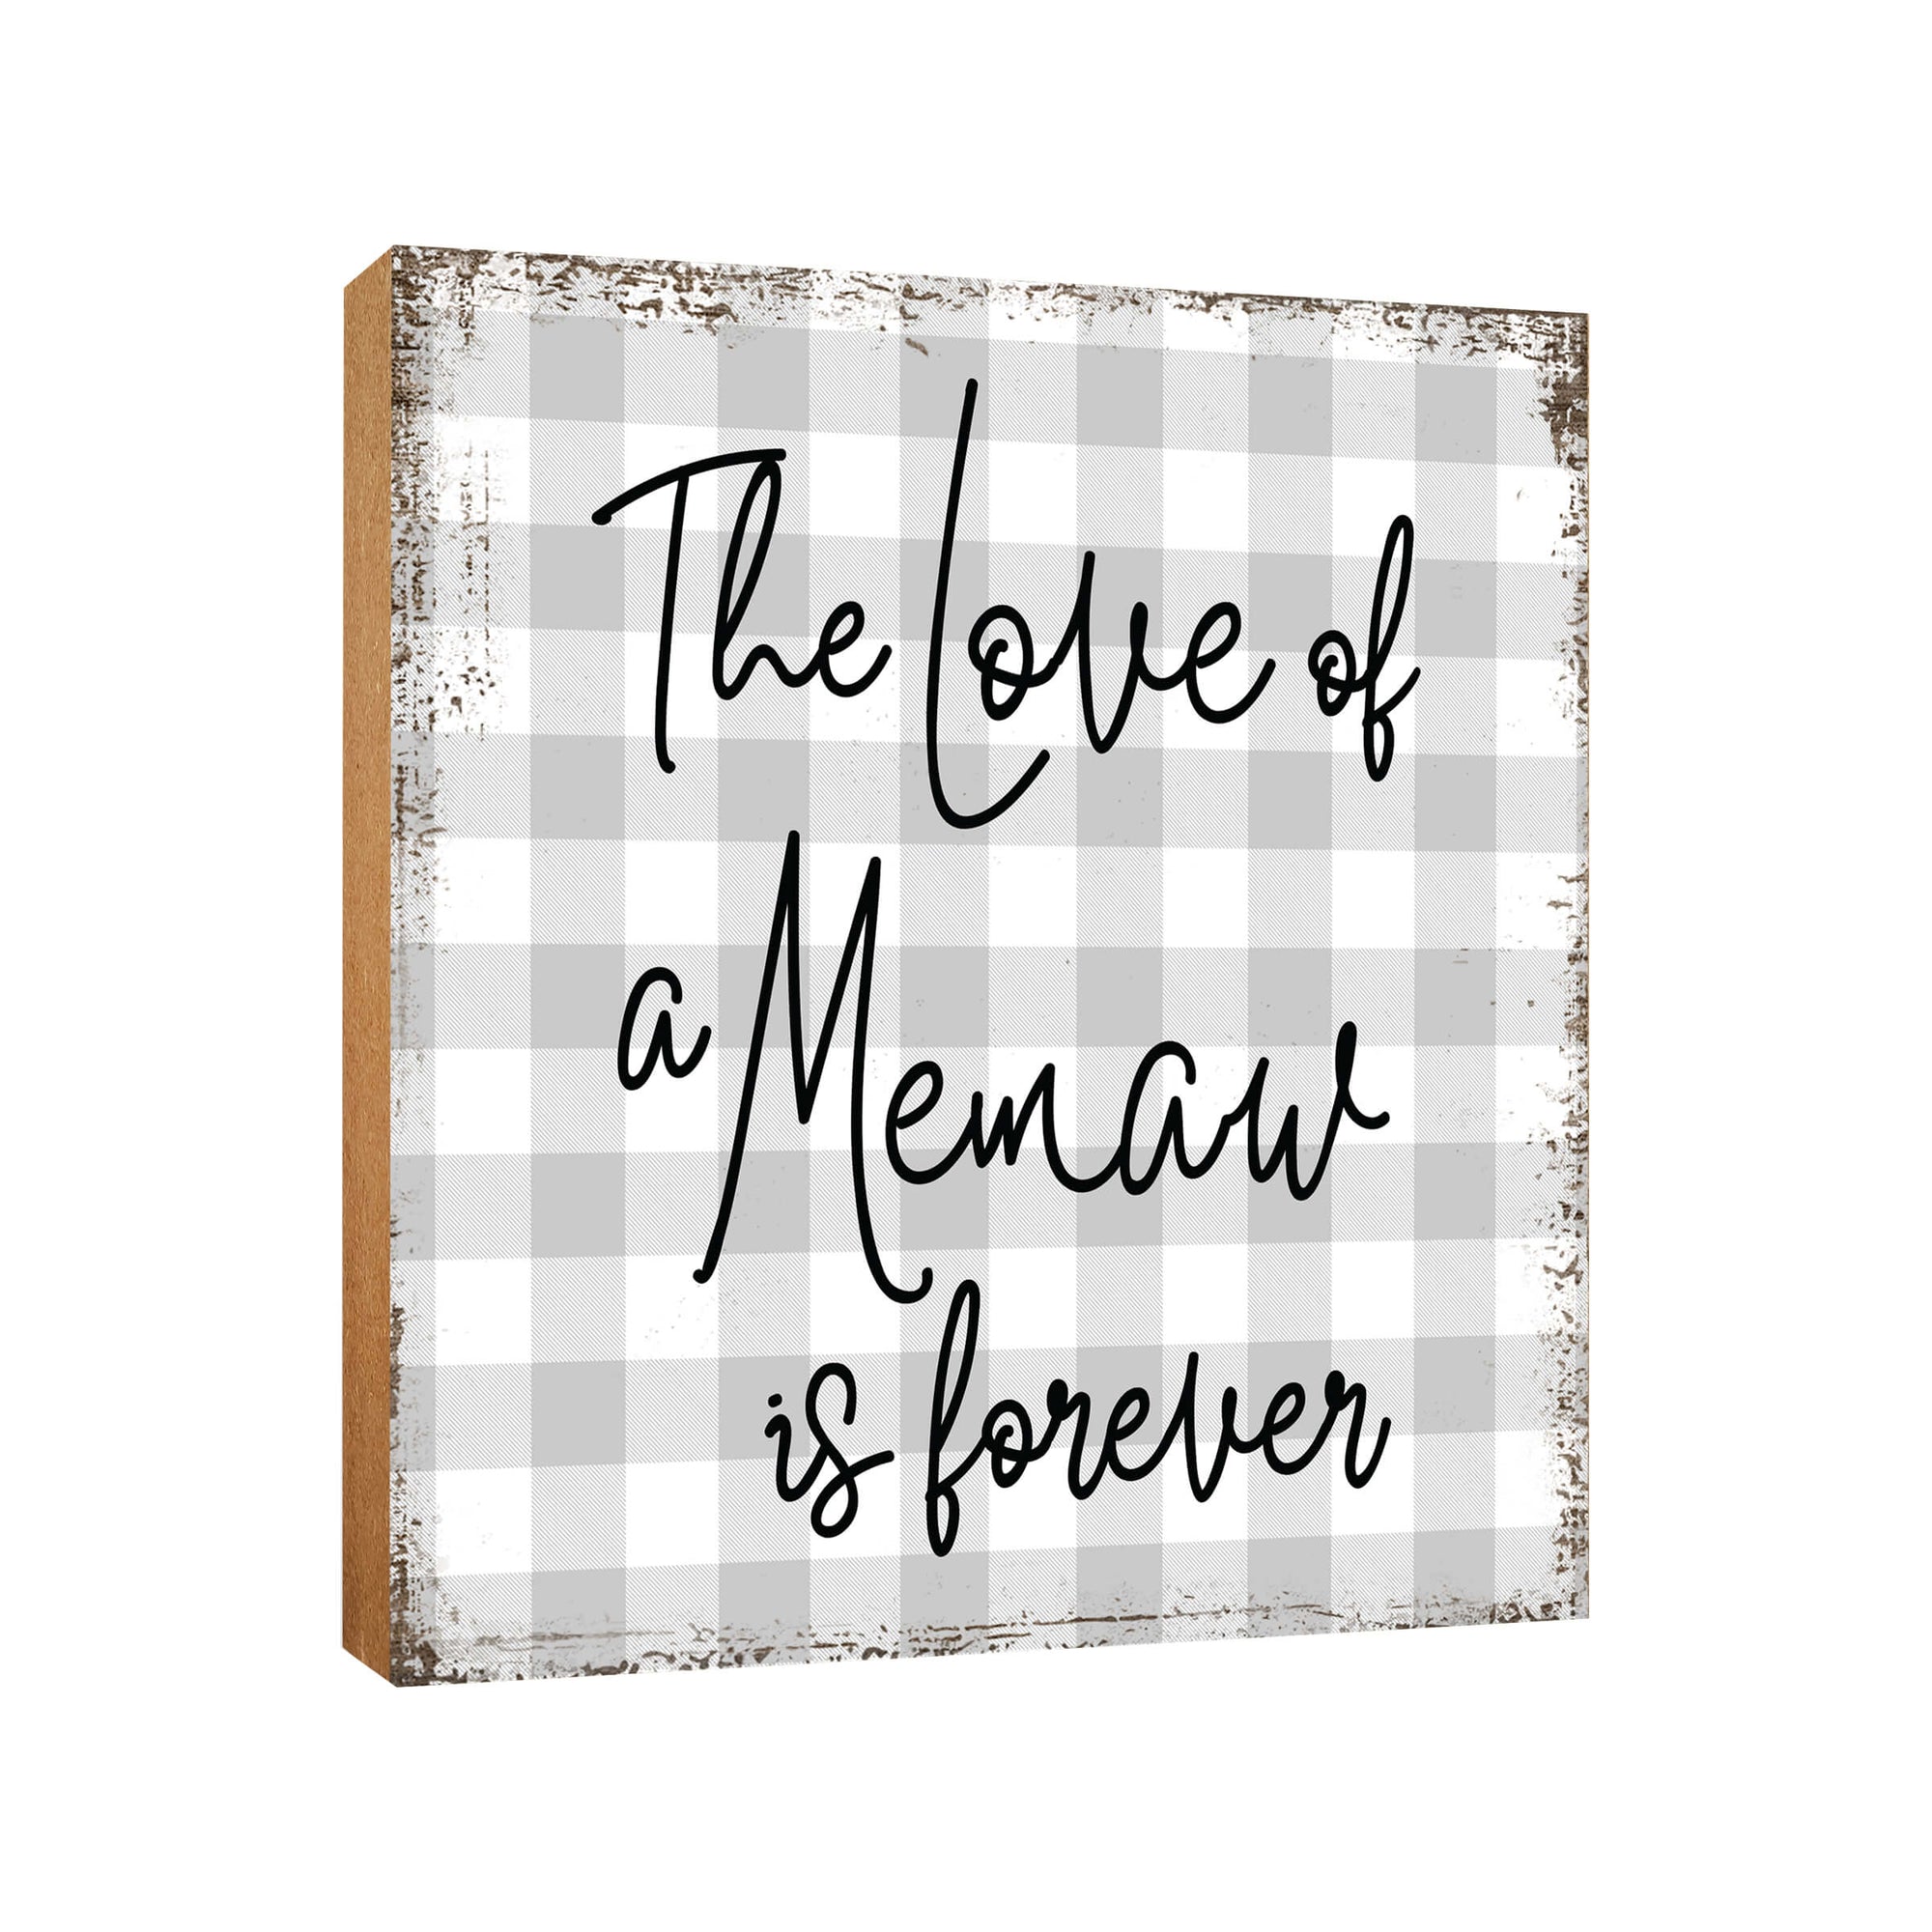 Heartwarming Wooden Shelf Decor - Tabletop Signs Gift for Grandmother, a Distinctive Mother's Day Expression